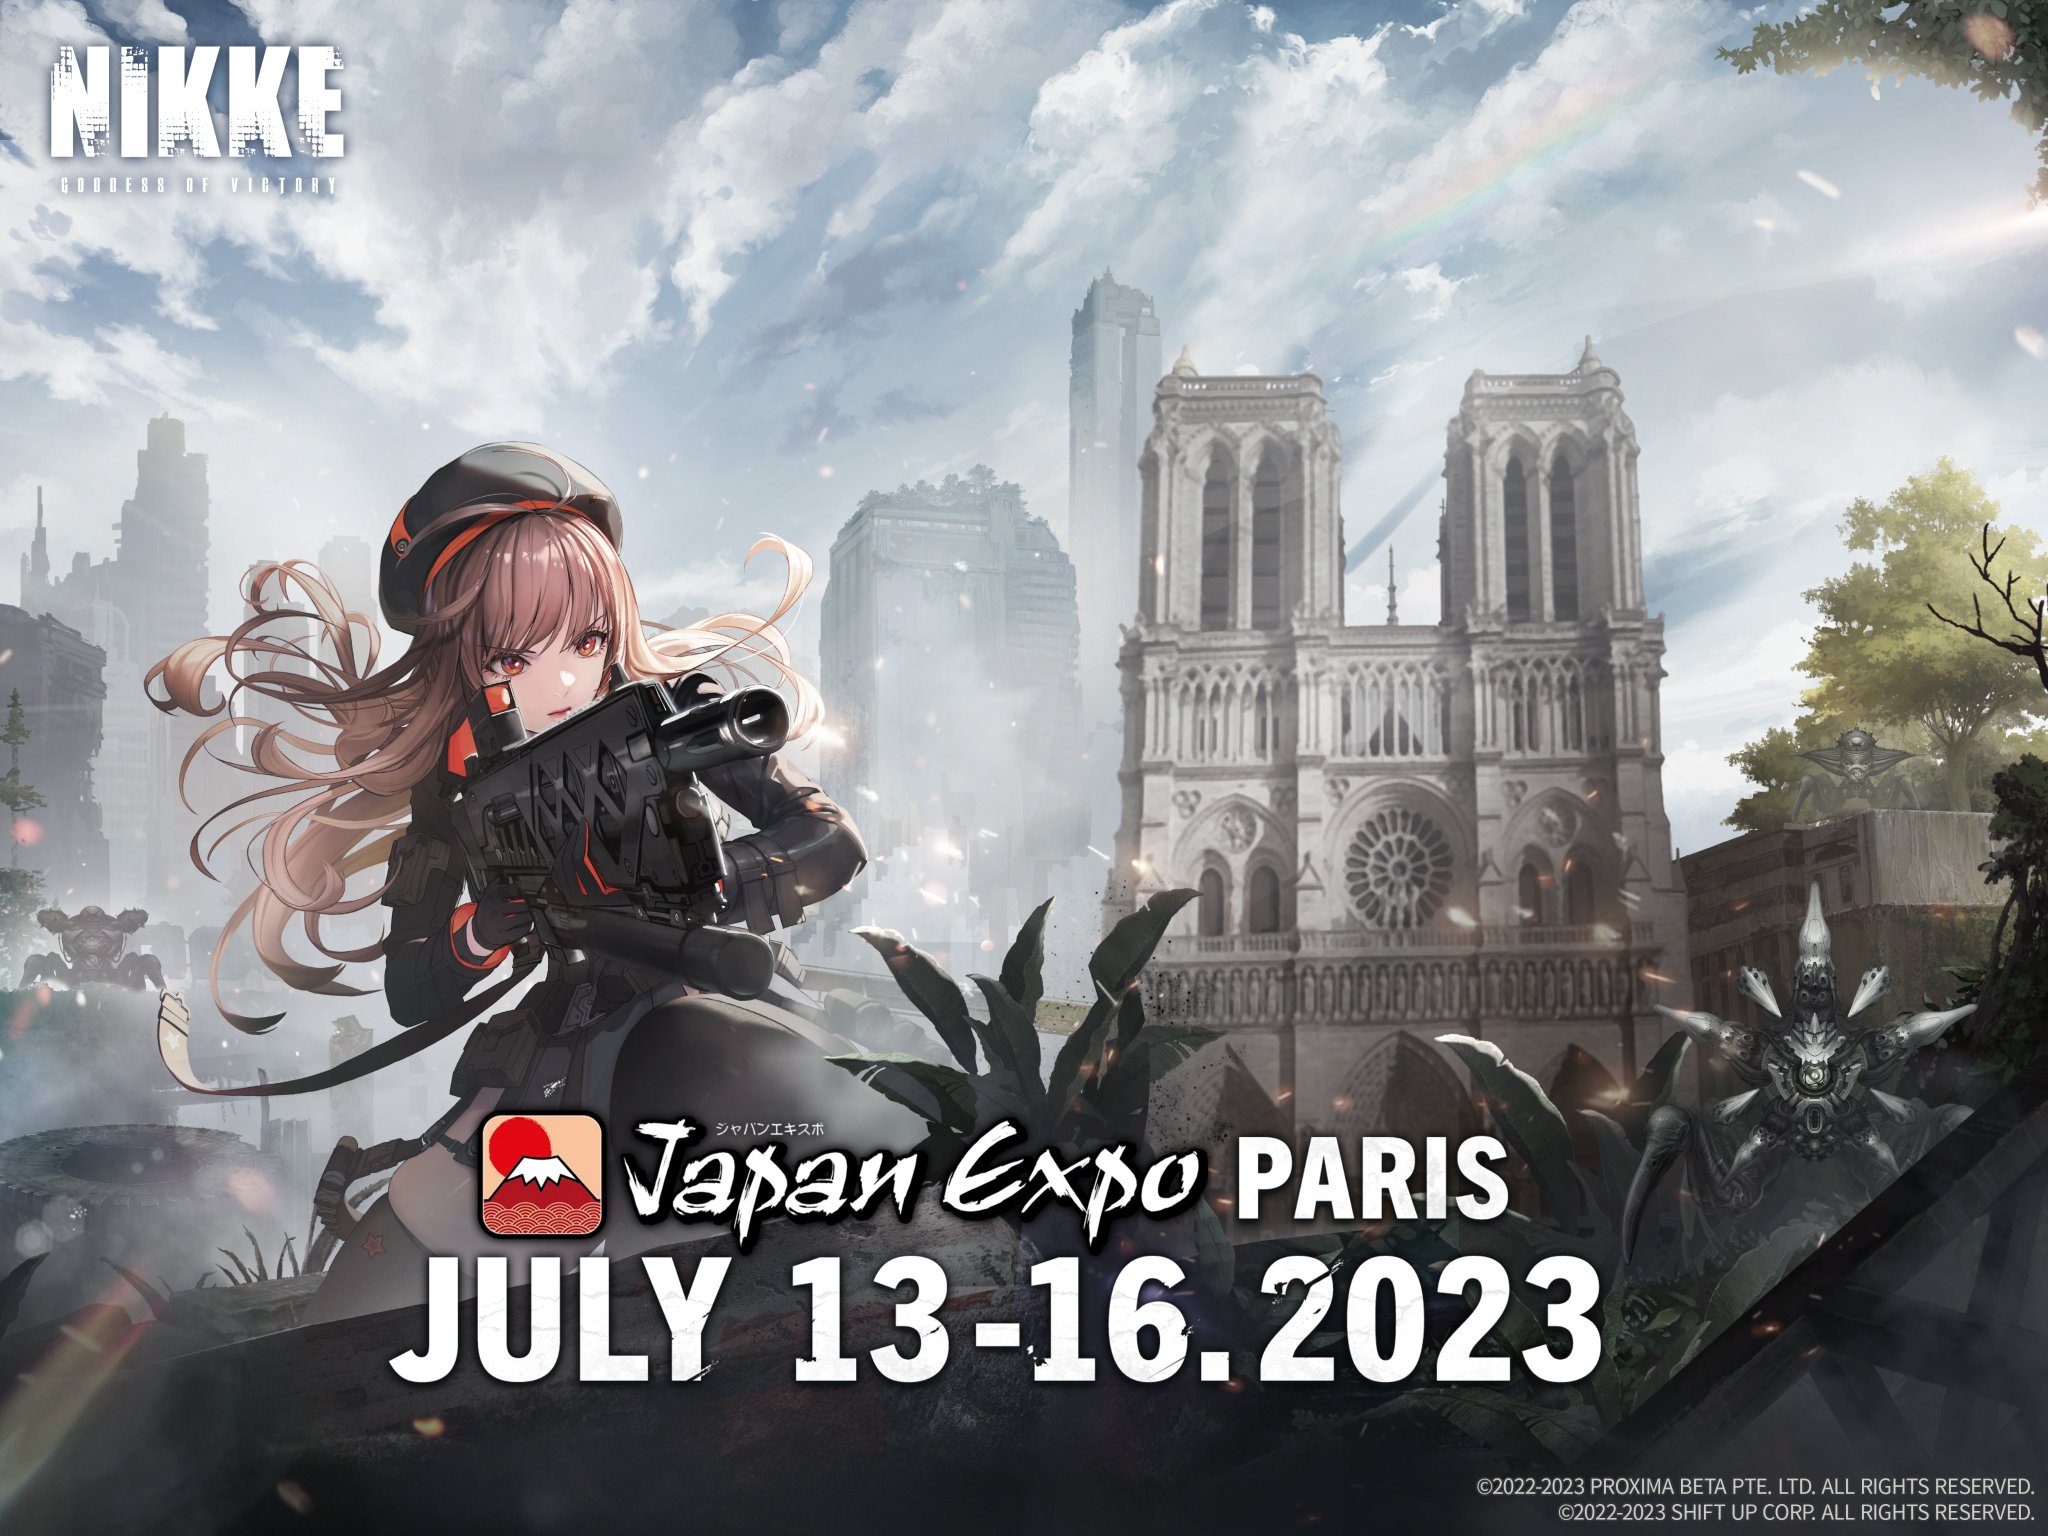 GODDESS OF VICTORY: Twitter: "【French Text Localized Version】 The French text localized version of GODDESS OF VICTORY: will be available on July 6th! Commanders, it's time to prepare